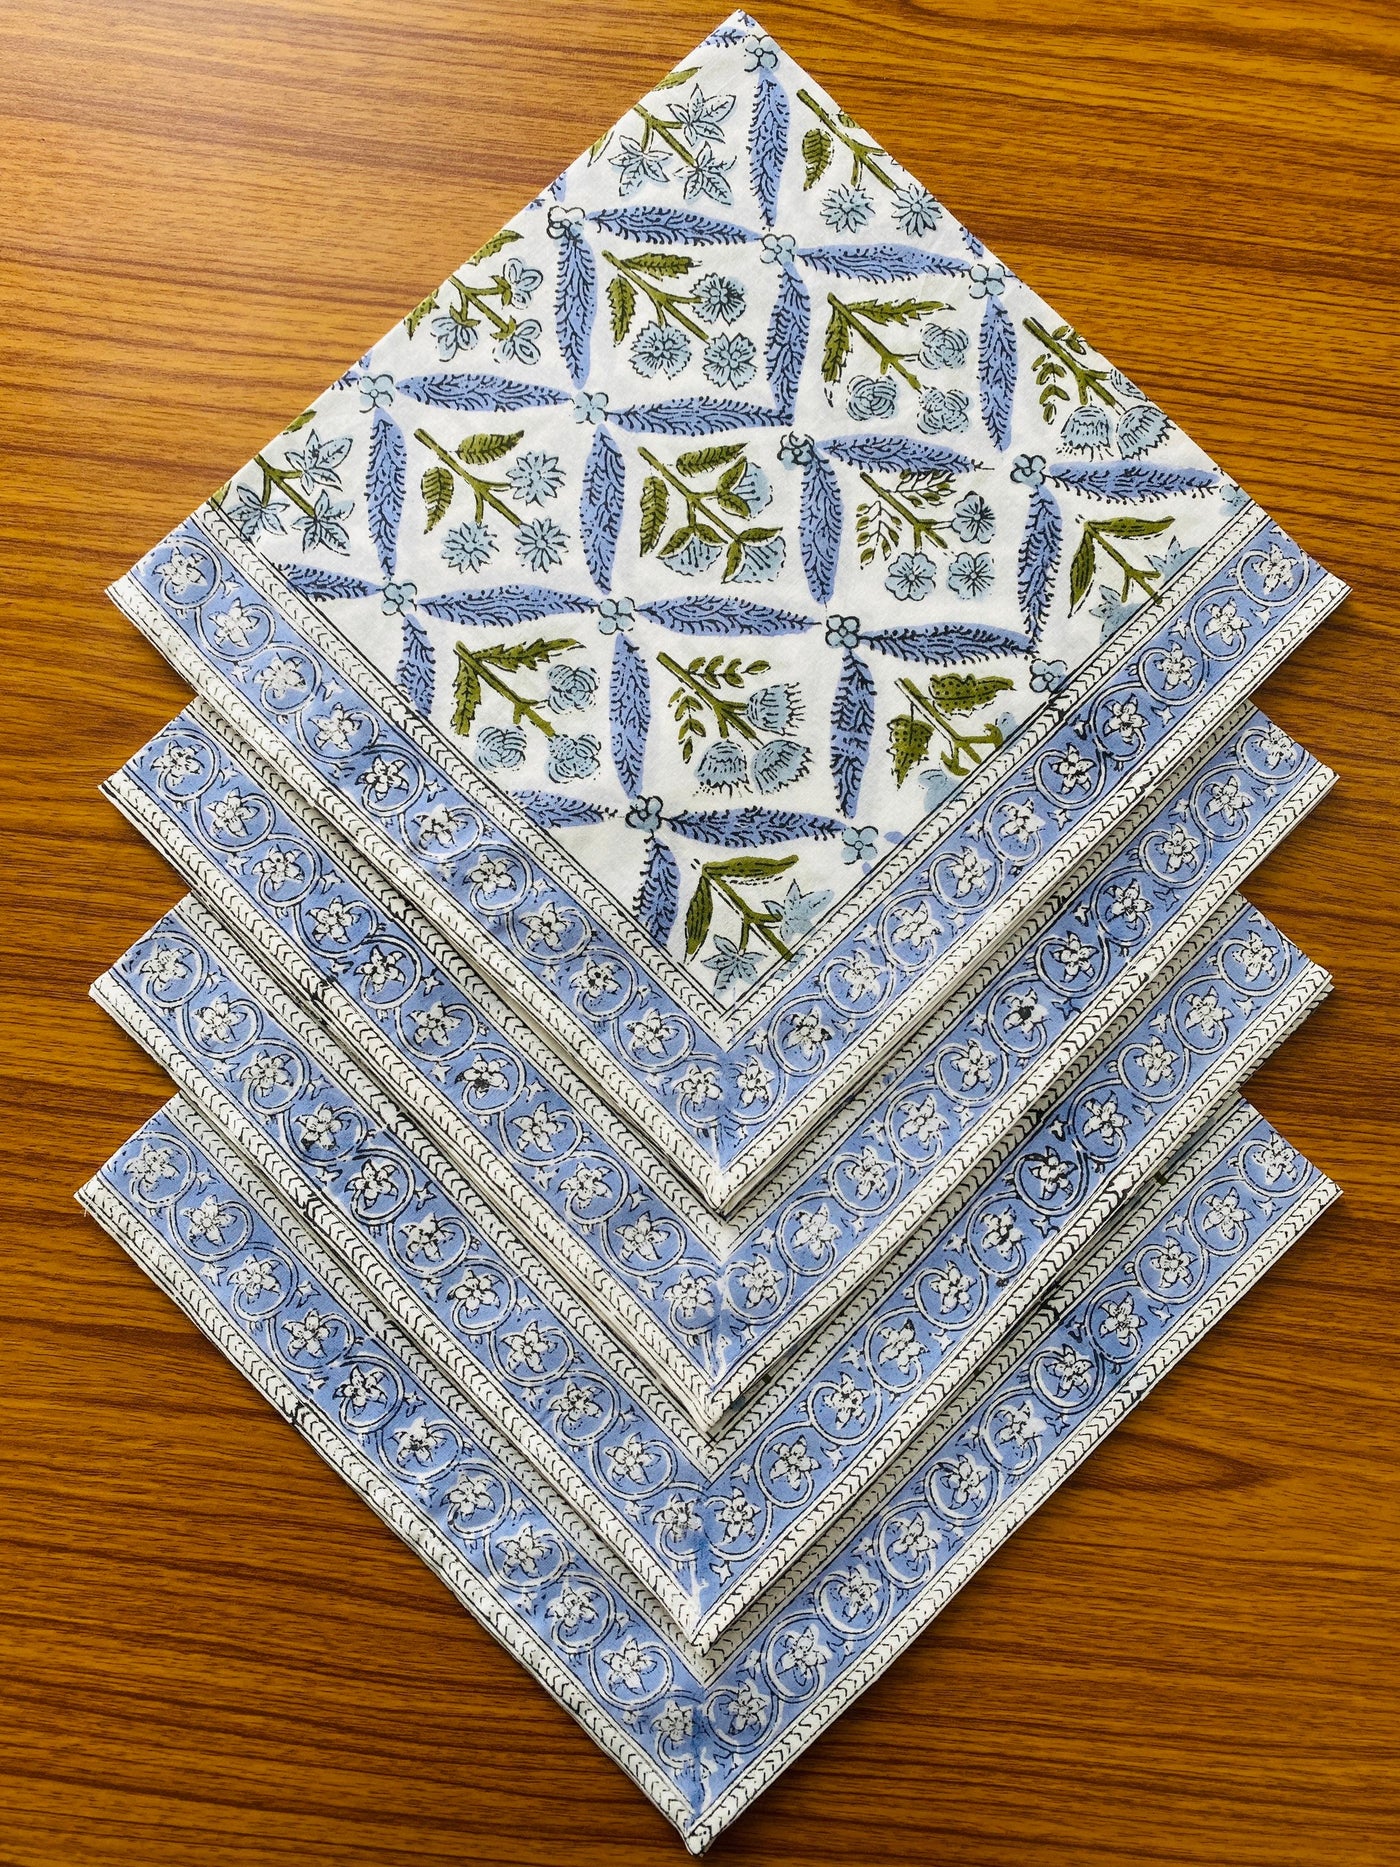 Light Steel Blue, Olive Green Indian Floral Hand Block Printed 100% Pure Cotton Cloth Napkins Size 20x20" Set of 4,6,12,24,48 Valentines Day